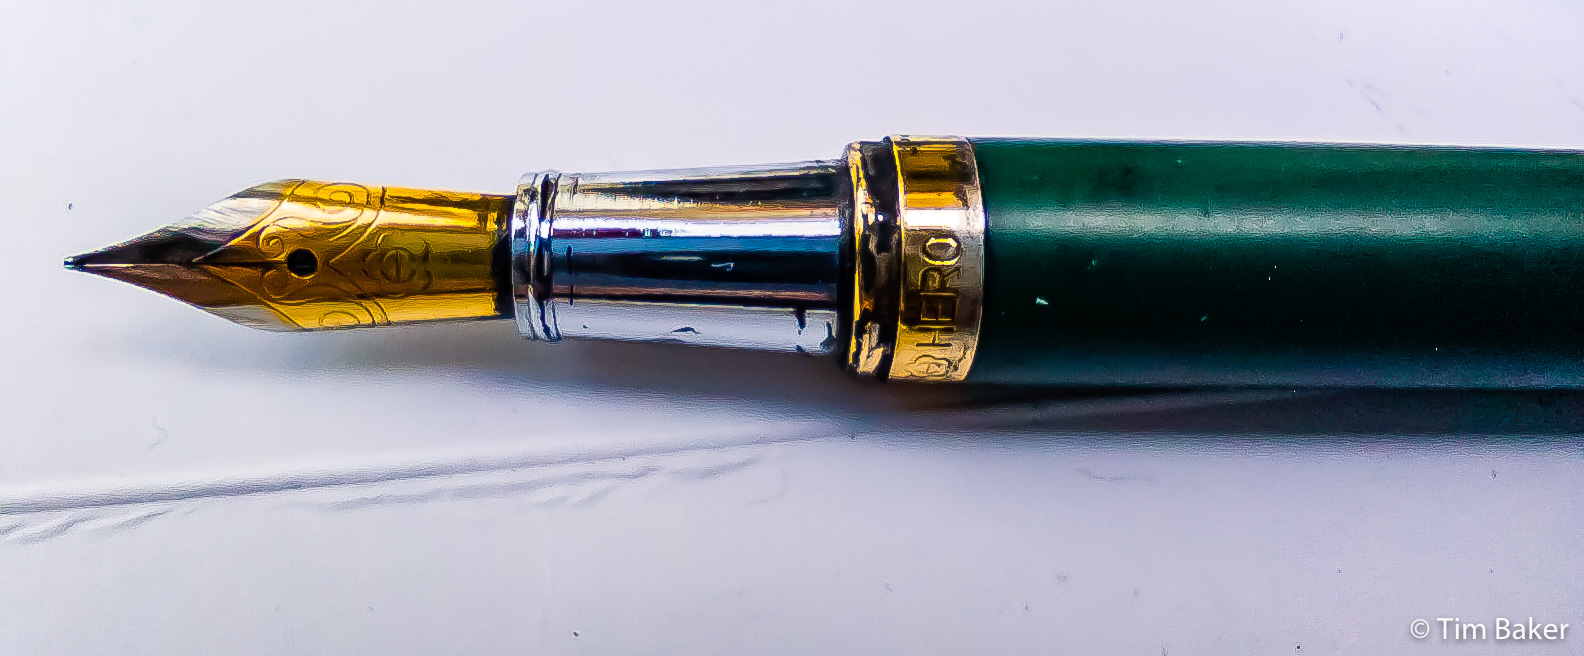 Beginner's Guide to Fountain Pens